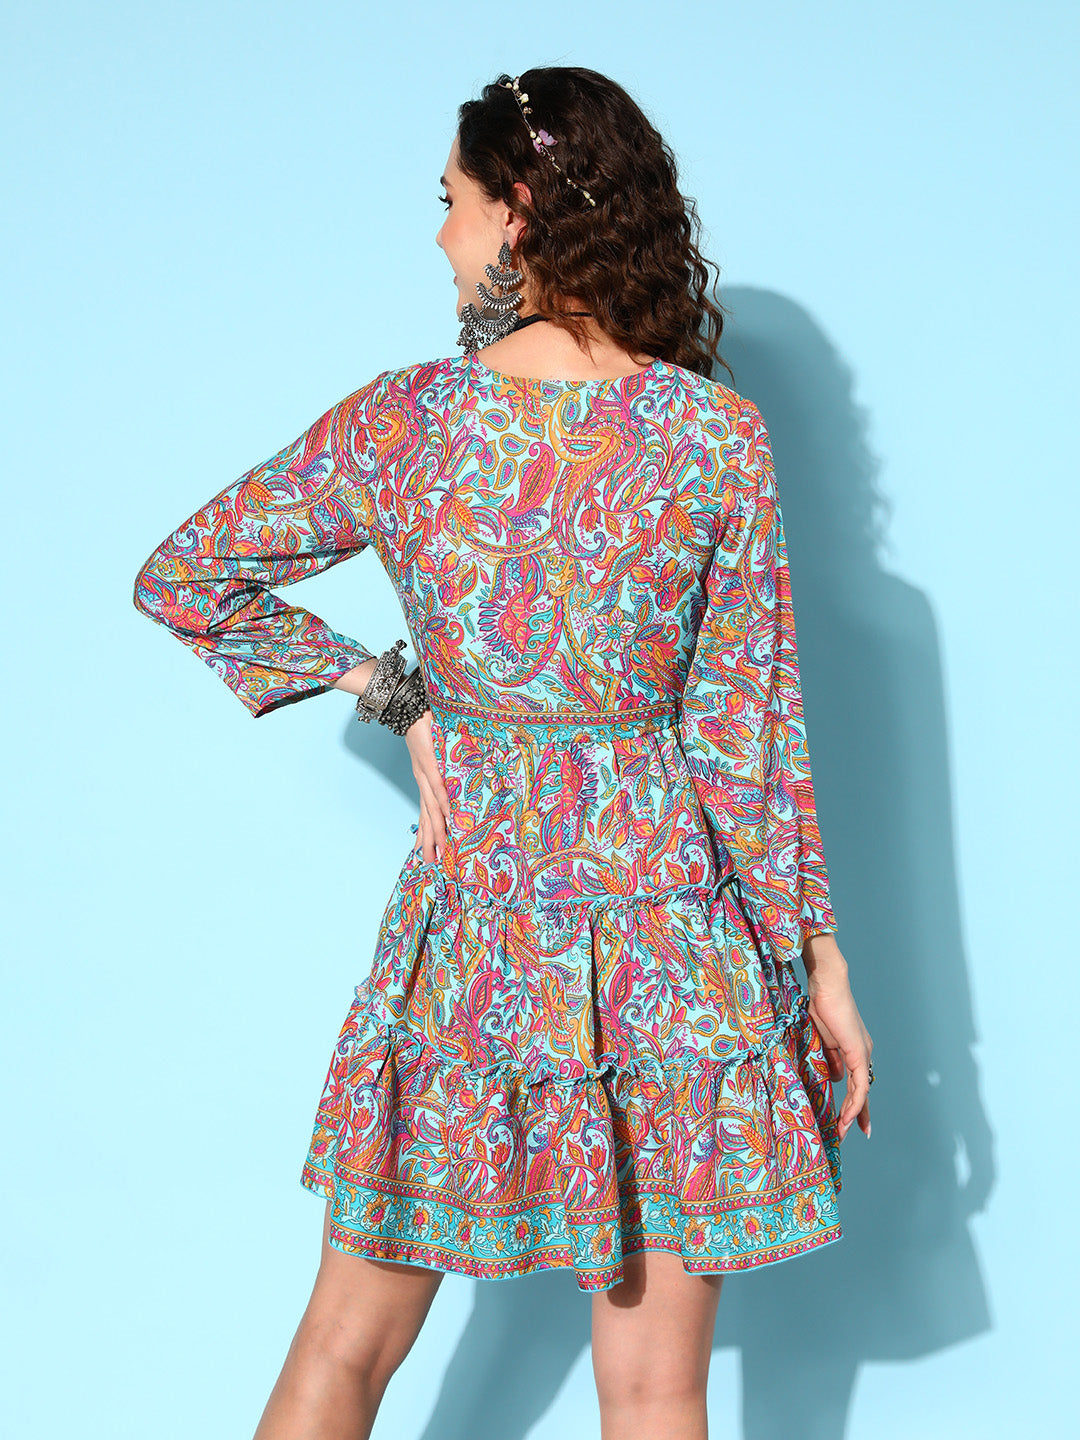 Teal Blue- Pink Paisley Print Tiered Dress